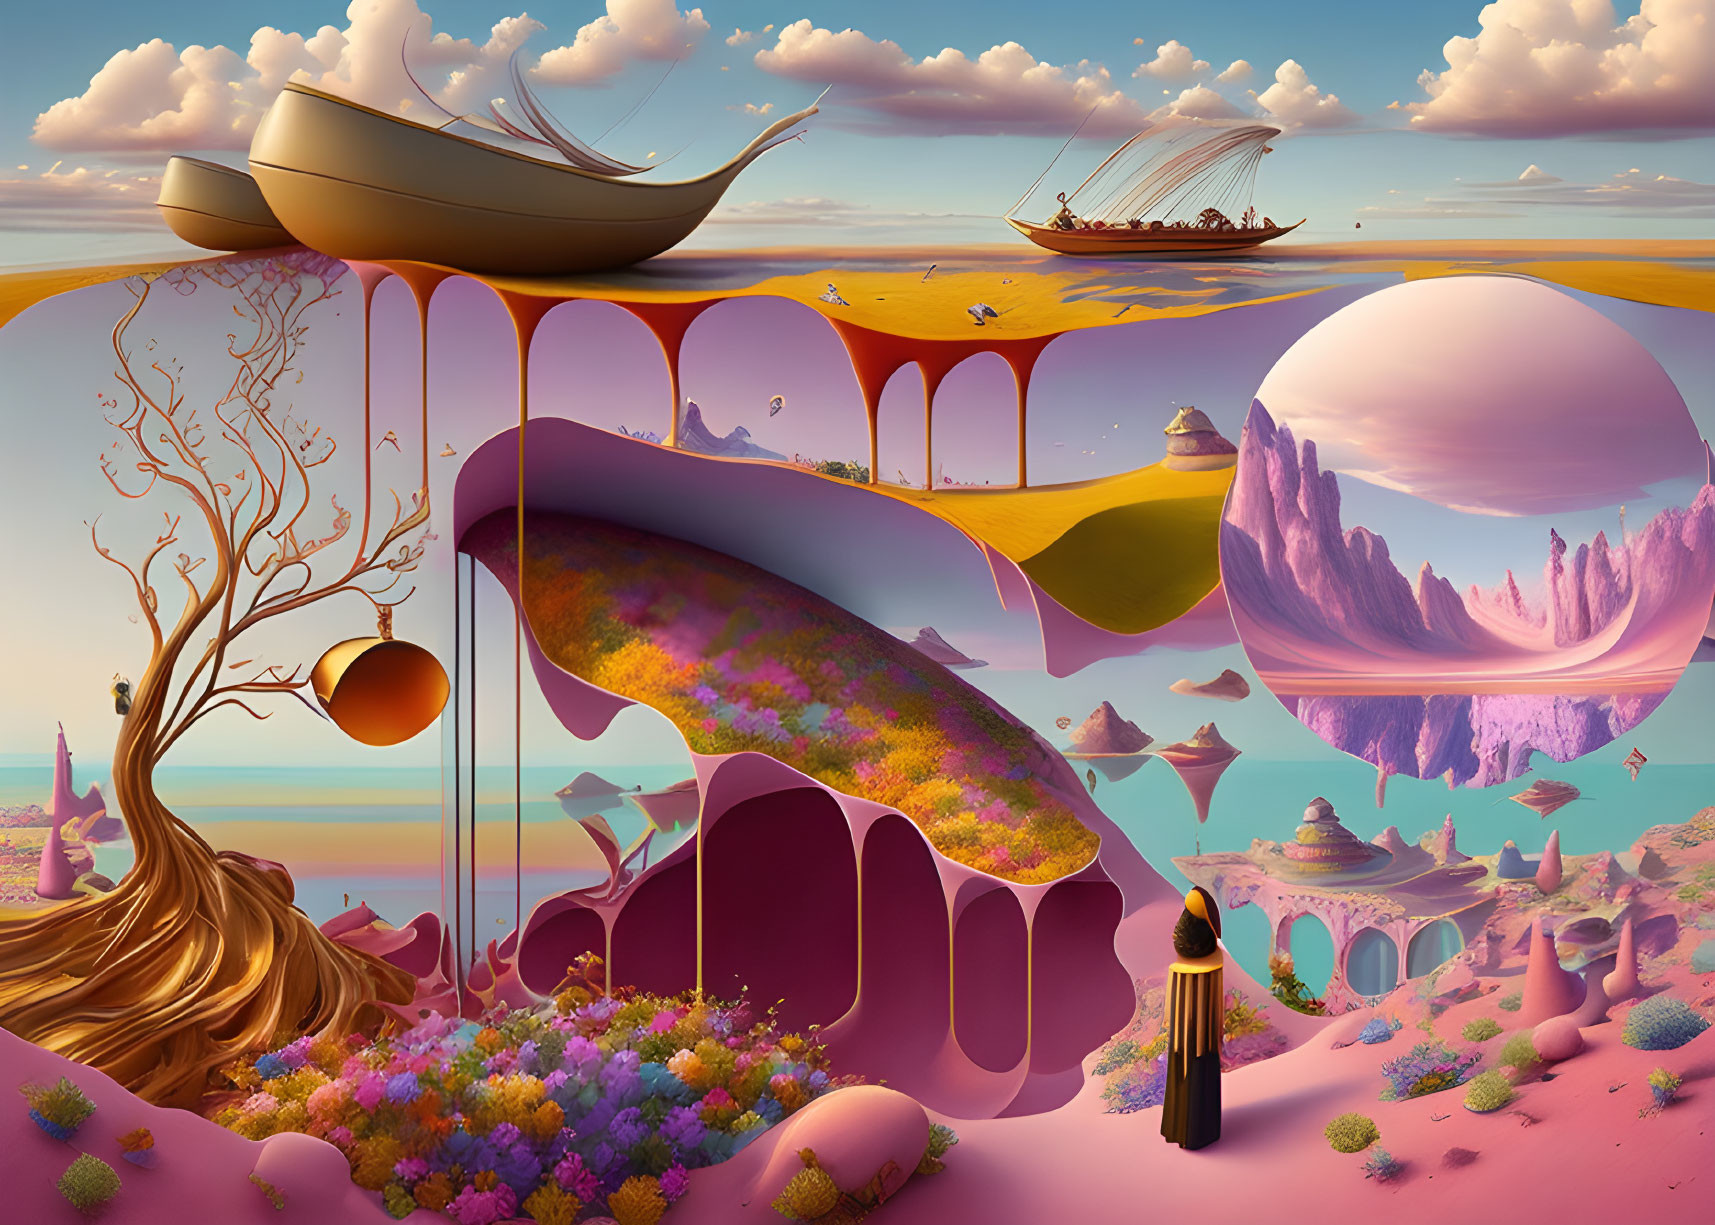 Surreal landscape with floating ships, piano tree, oversized objects, and moons under pastel sky